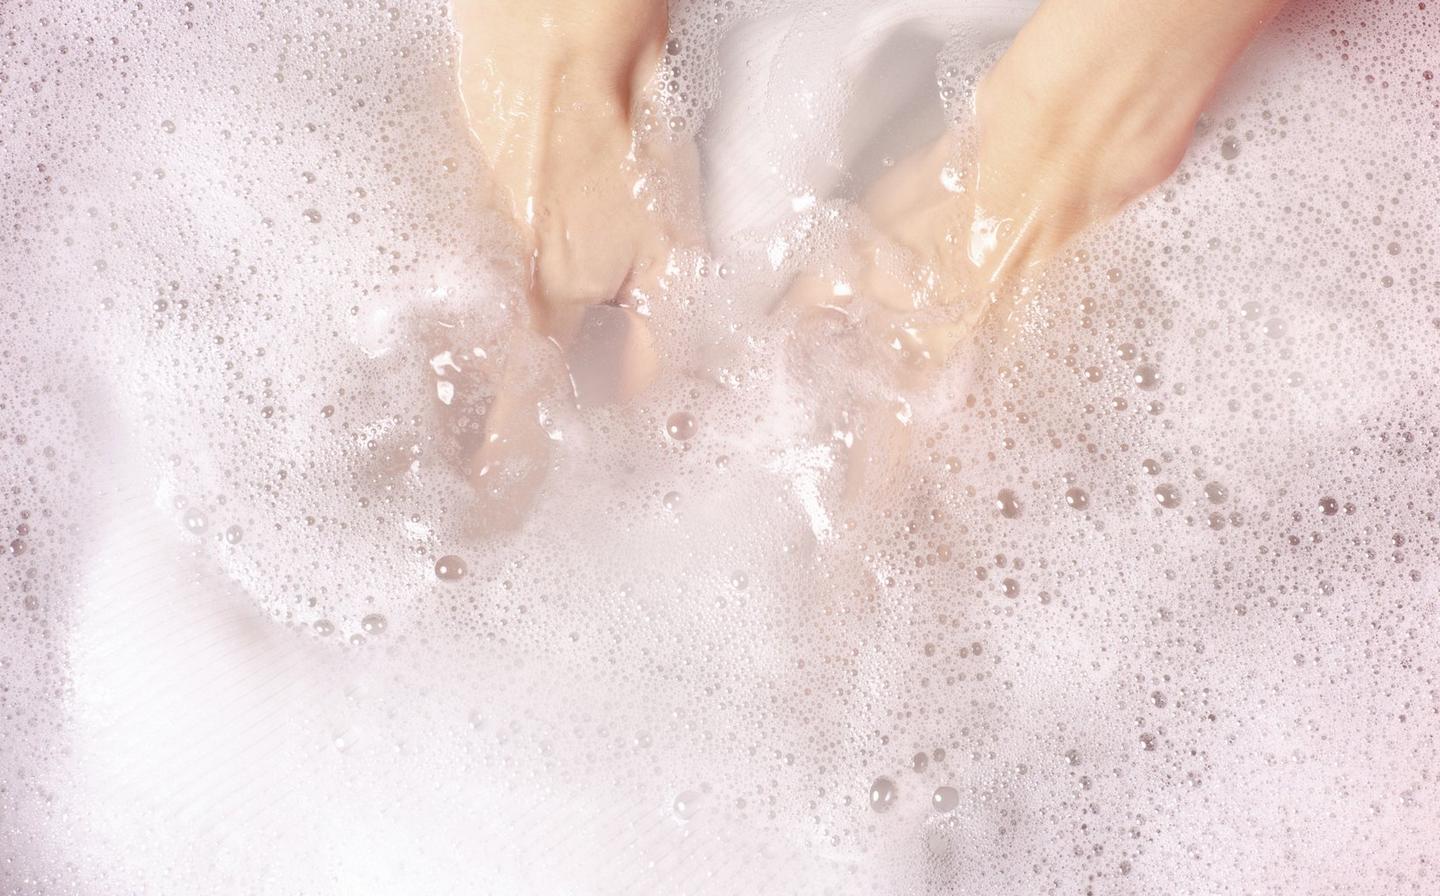 A cashmere knit being hand washed in soapy cool water with a non-bio detergent